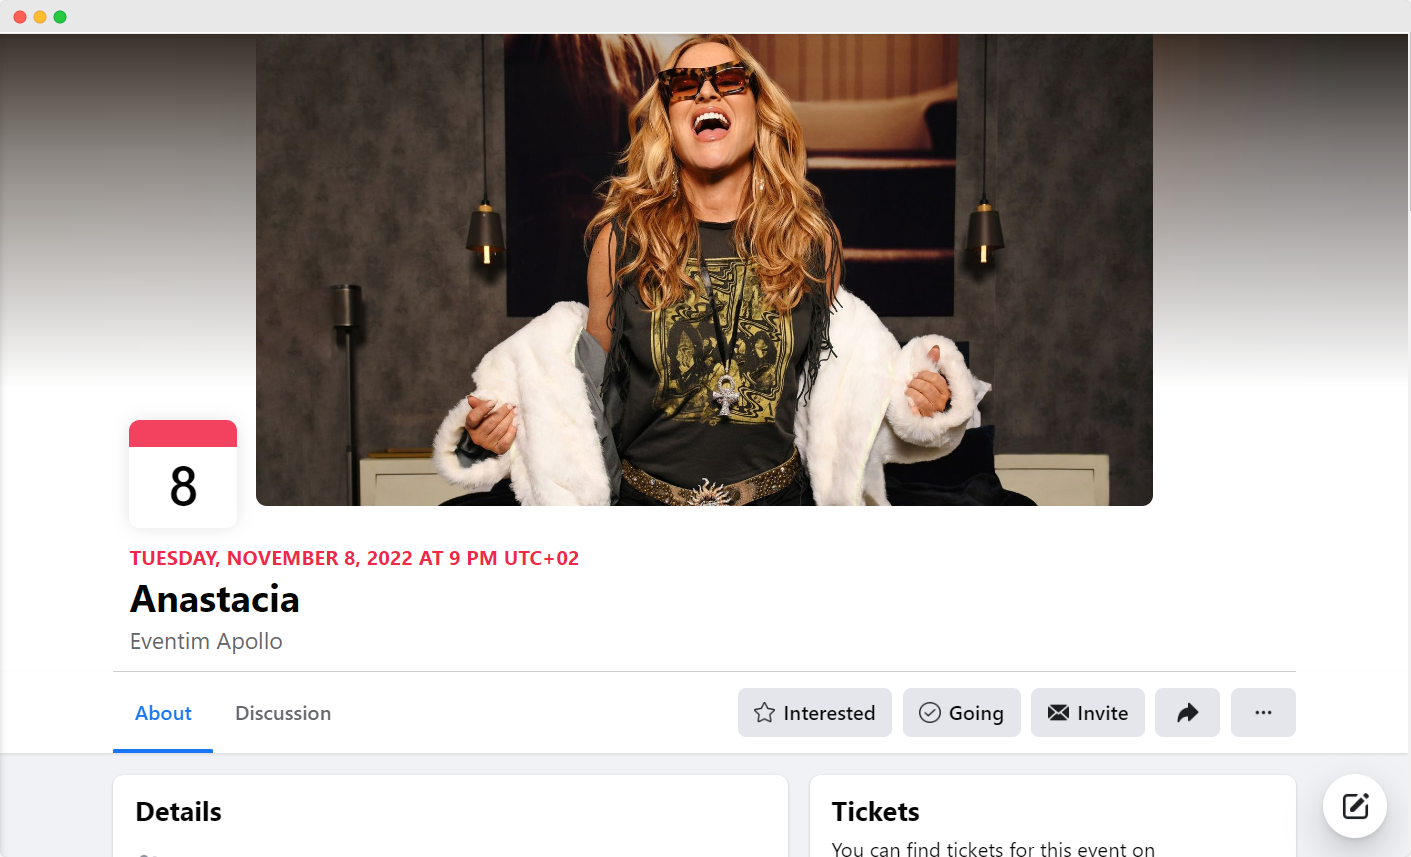 Woman in sunglasses laughing, event details for Anastacia concert.